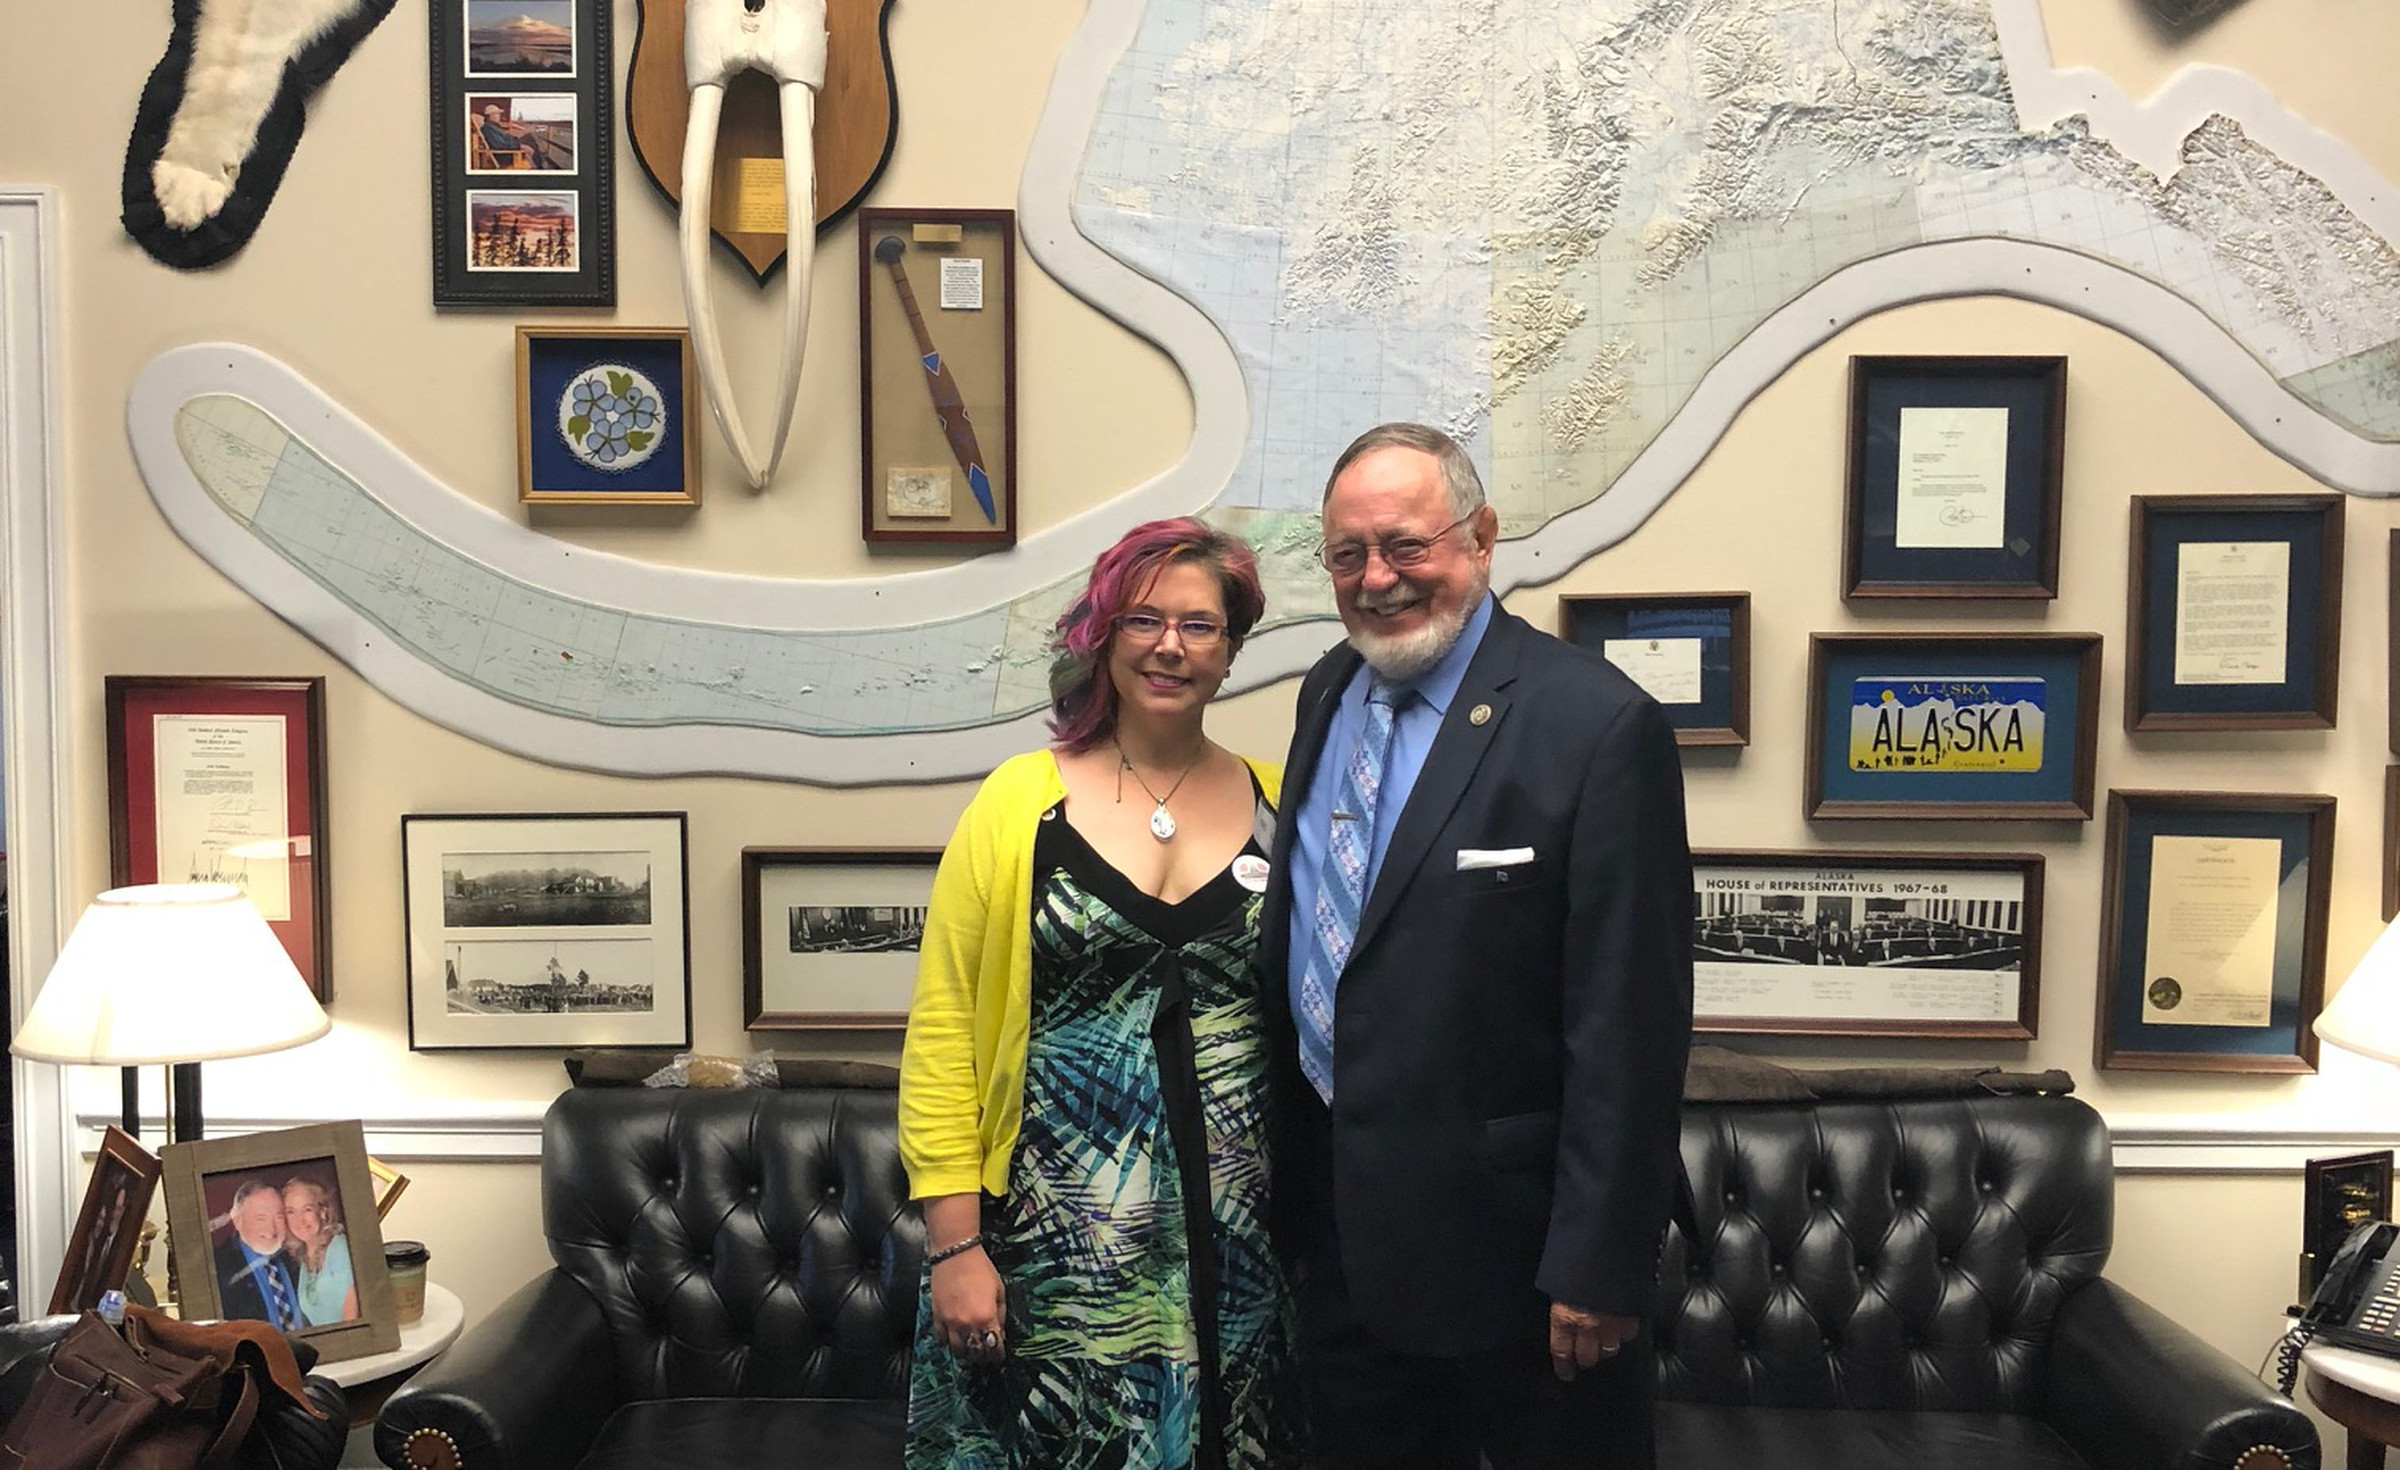 Owner of CustomMousePad.com, Jennie Stewart, poses for a photo with Rep. Don Young (R-AK).